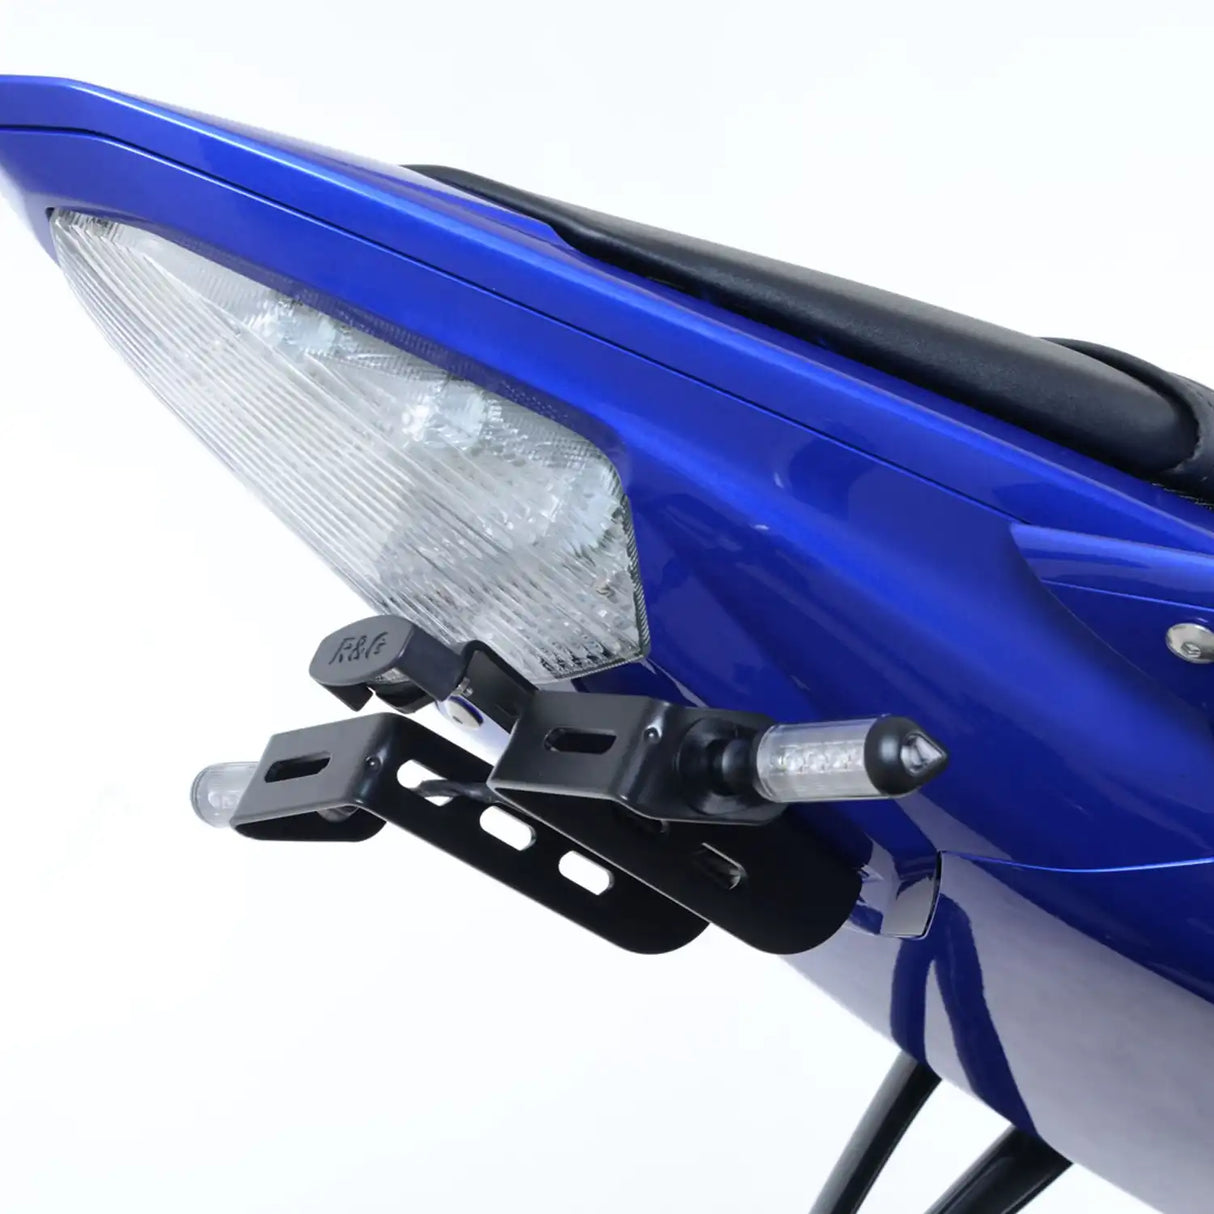 R&G Tail Tidy for Yamaha YZF-R6 '06-'16